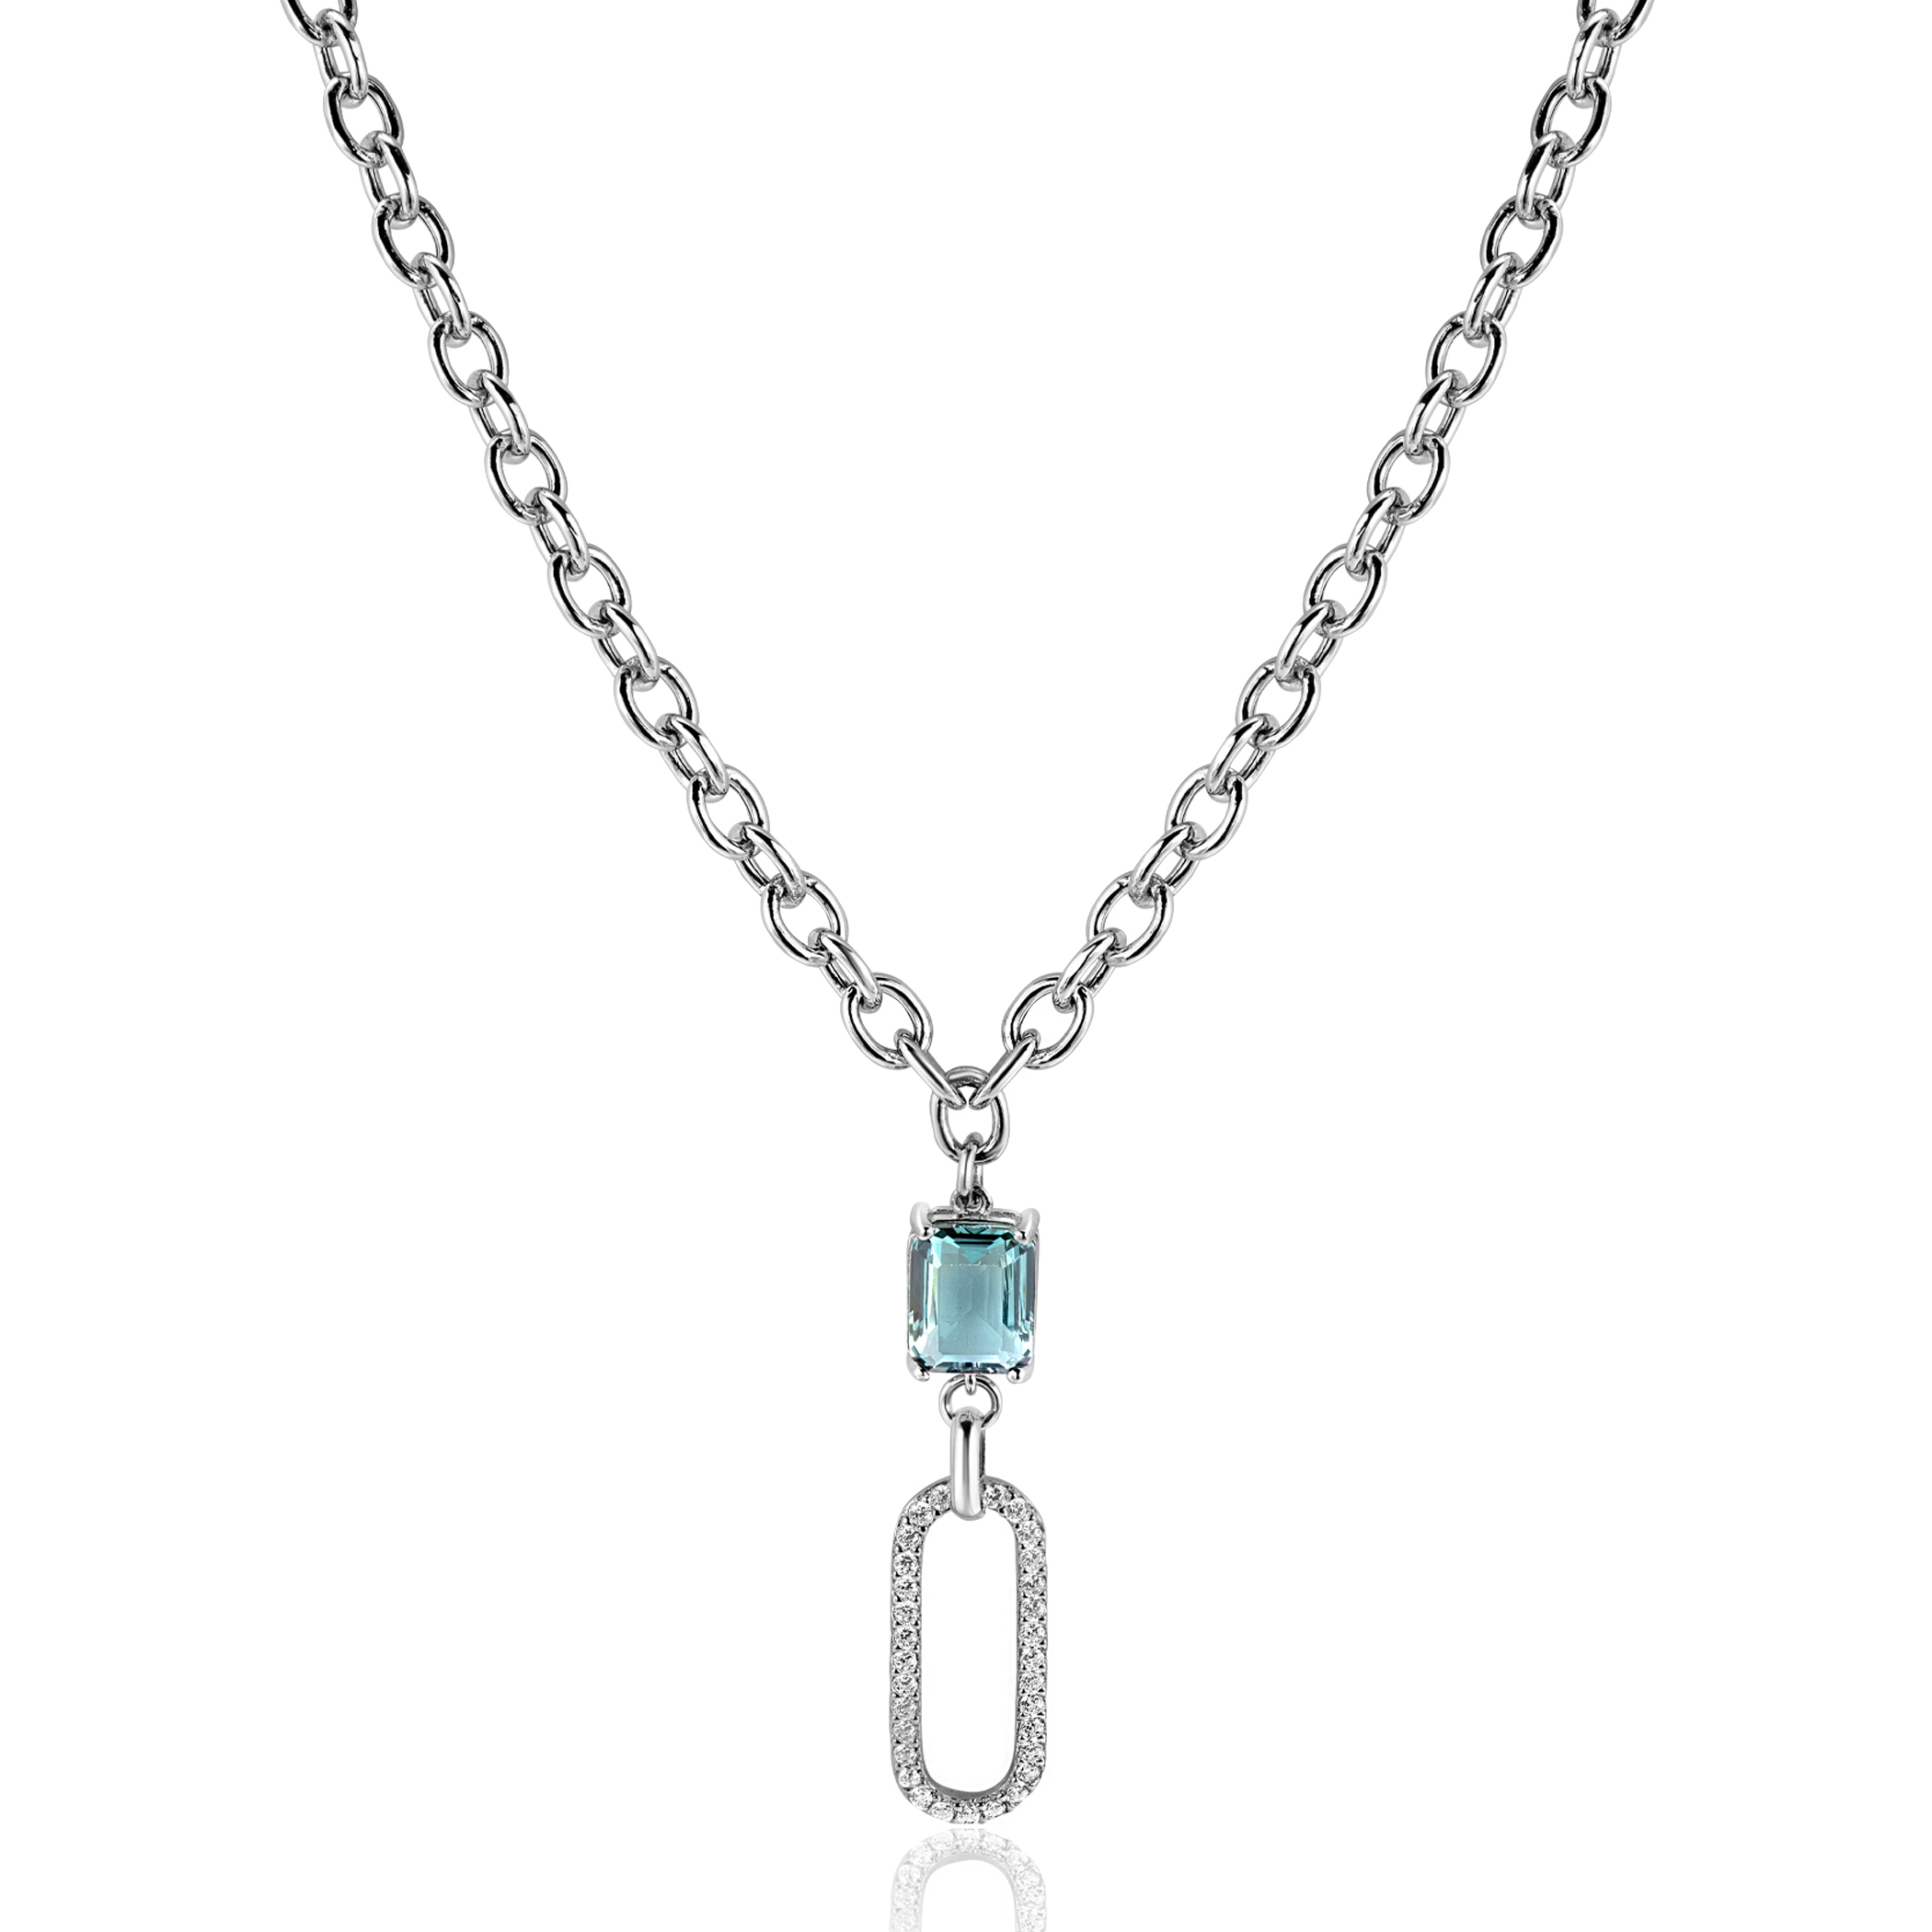 ZINZI Sterling Silver Fantasy Chain Necklace with Oval Pendant Set with White Zirconias and Green/Blue (Petrol) Color Stone in Prong Setting 45cm ZIC2487